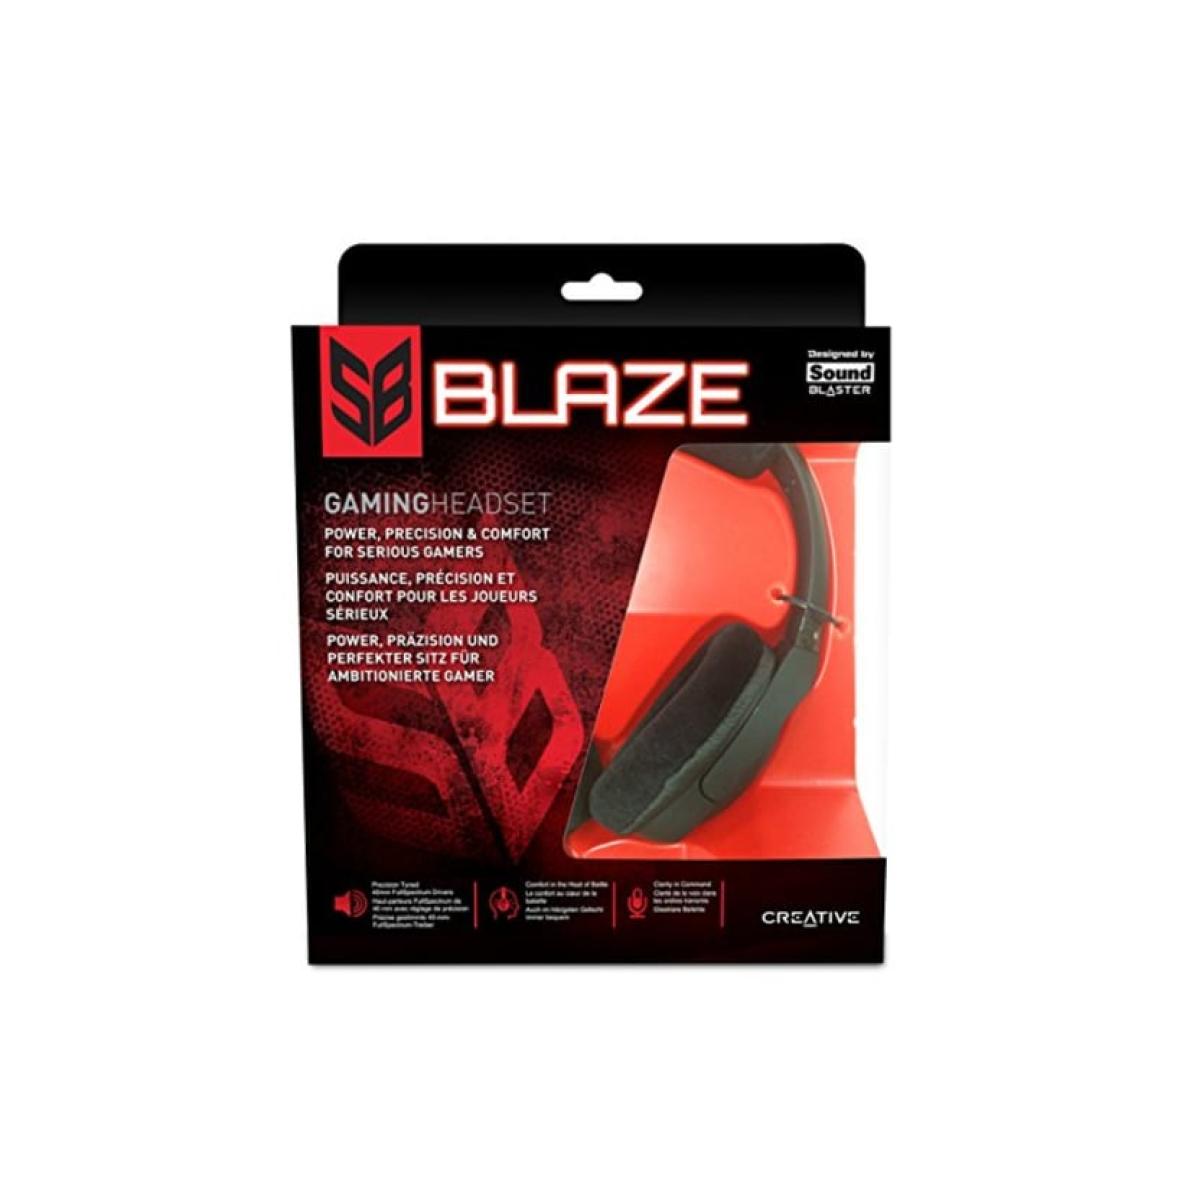 Creative Sound Blaster Blaze Gaming Headset with Detachable Noise-Cancelling Mic and in-line Remote